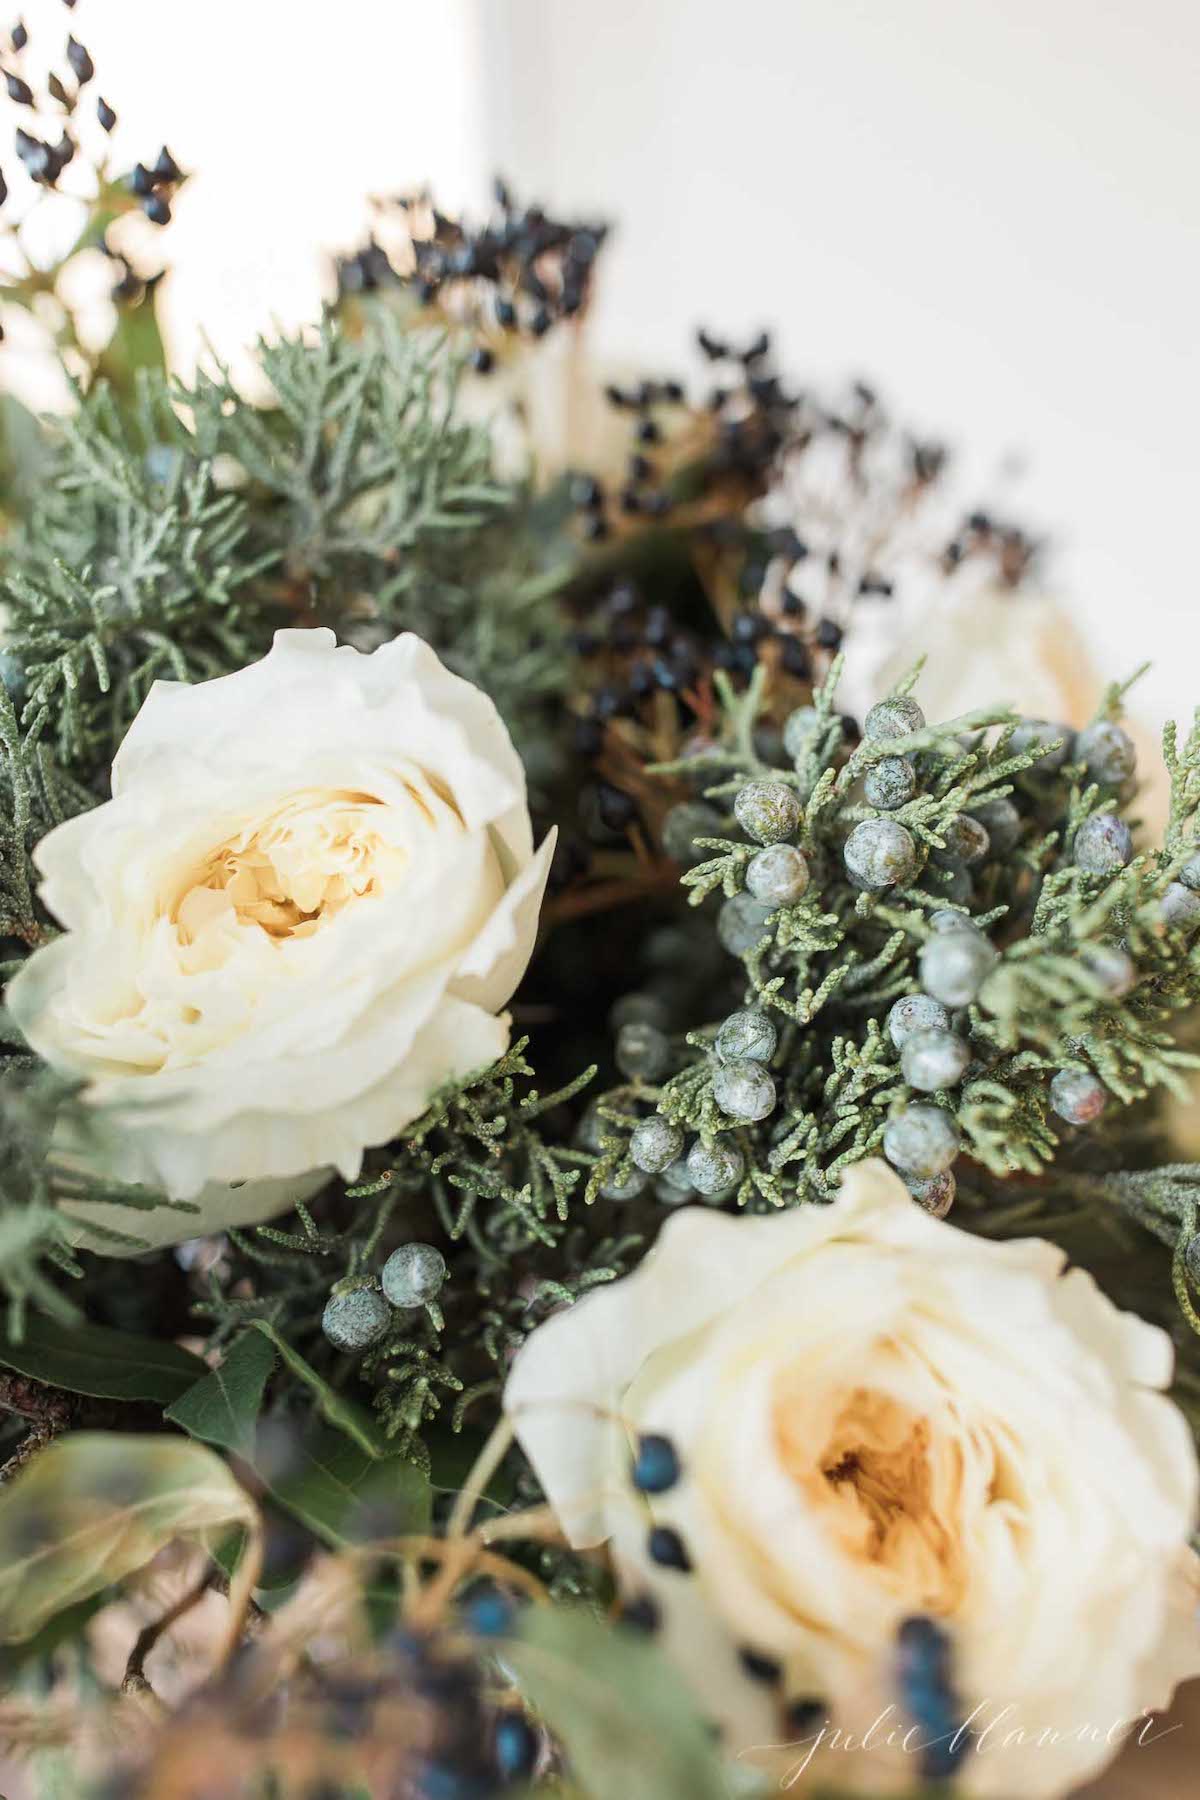 A bouquet of white roses and berries on a table.